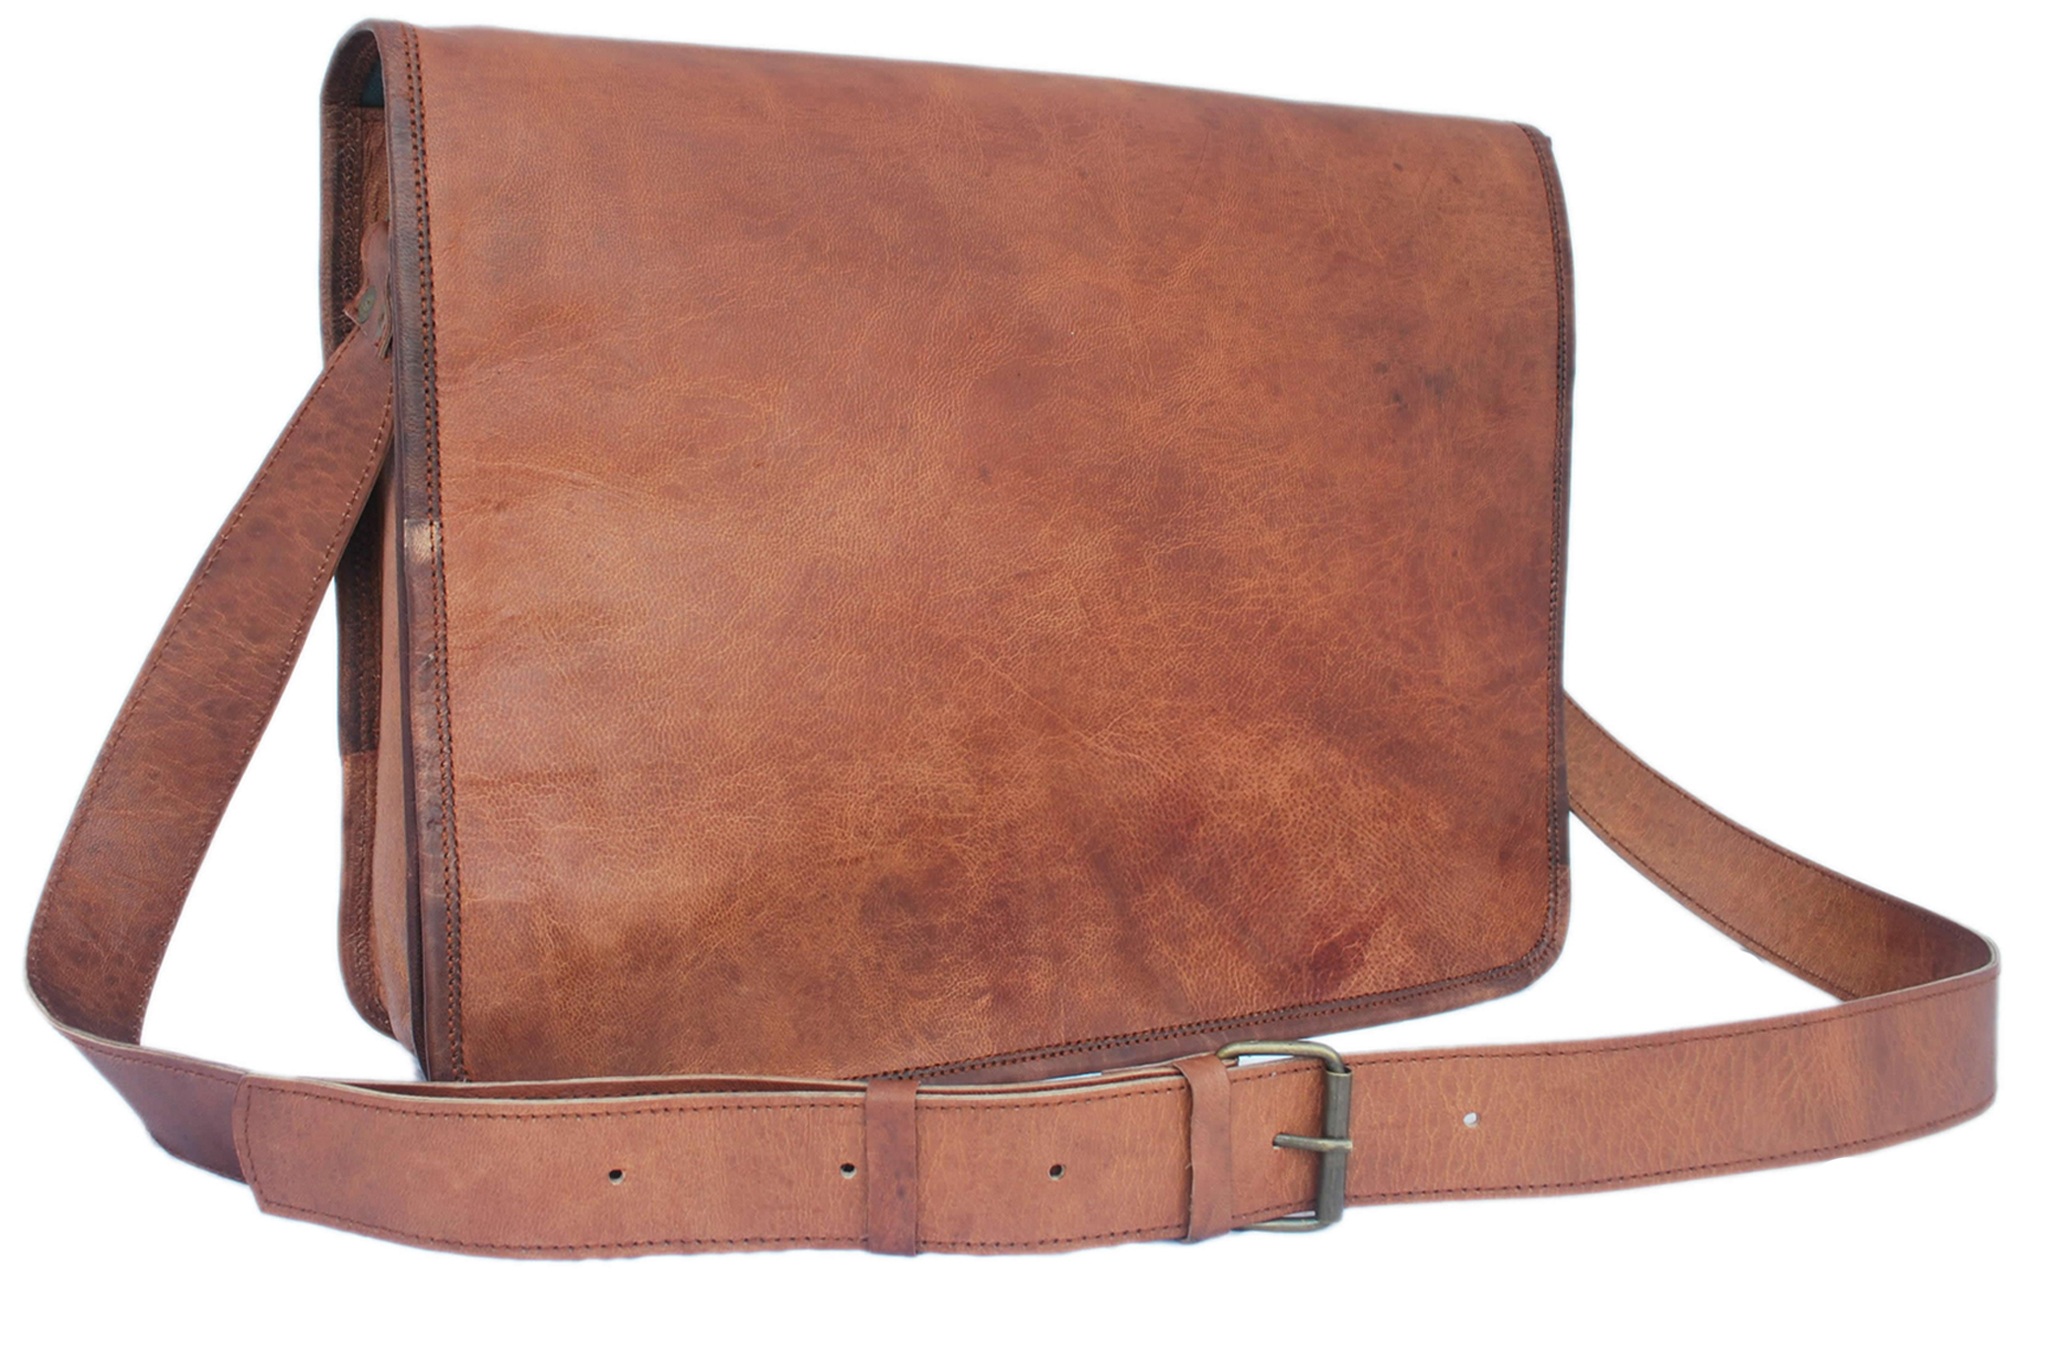 Different Kind Of Leather Messenger Bags For Men’s | highonleather